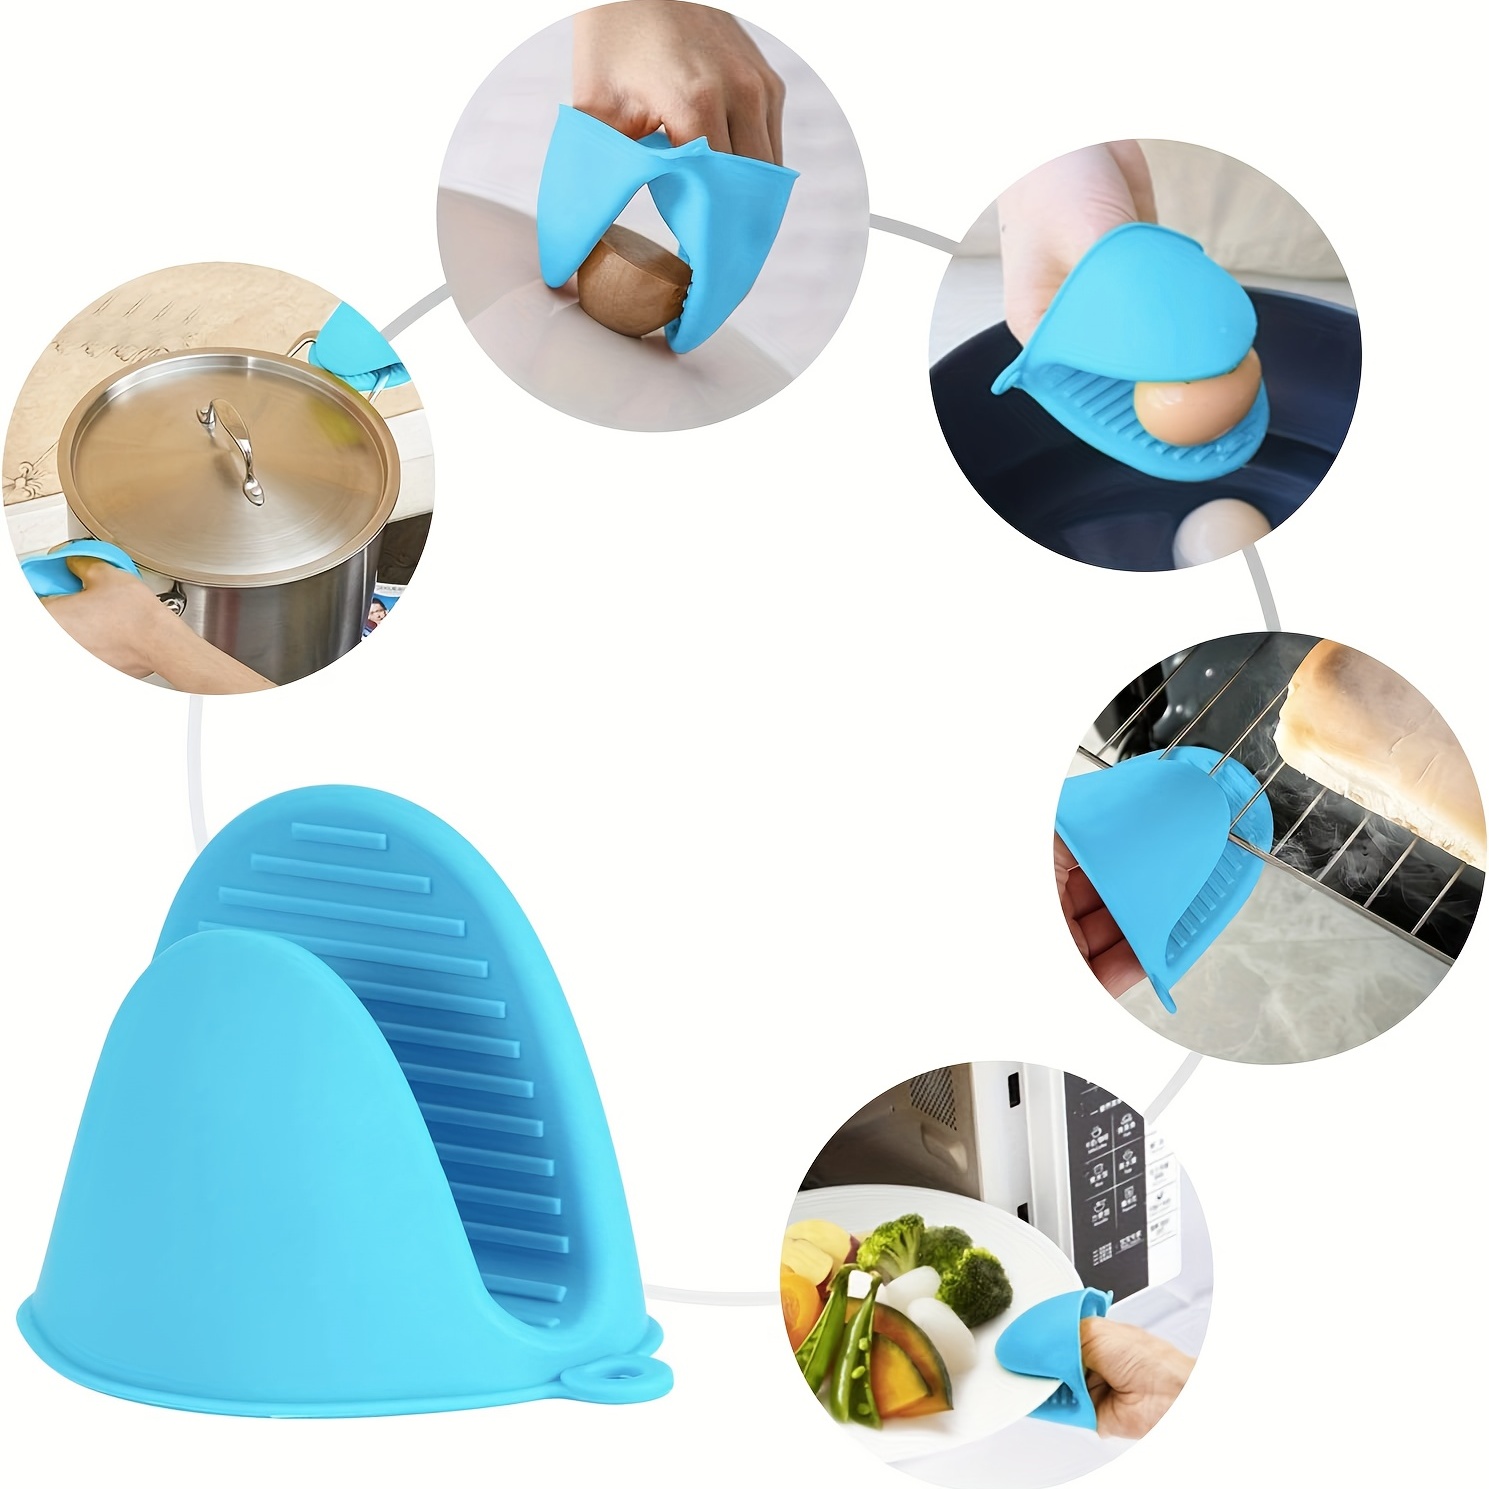  COLLBATH 10pcs Oven Mitts Mini Silicone Oven Mitt Finger Magnetic  Oven Gloves Mini Oven Mitt Silicone Pot Holder Silicone Pan Grips Silicone  Potholder Barbecue Punch Hole Bracket Silica Gel : Home